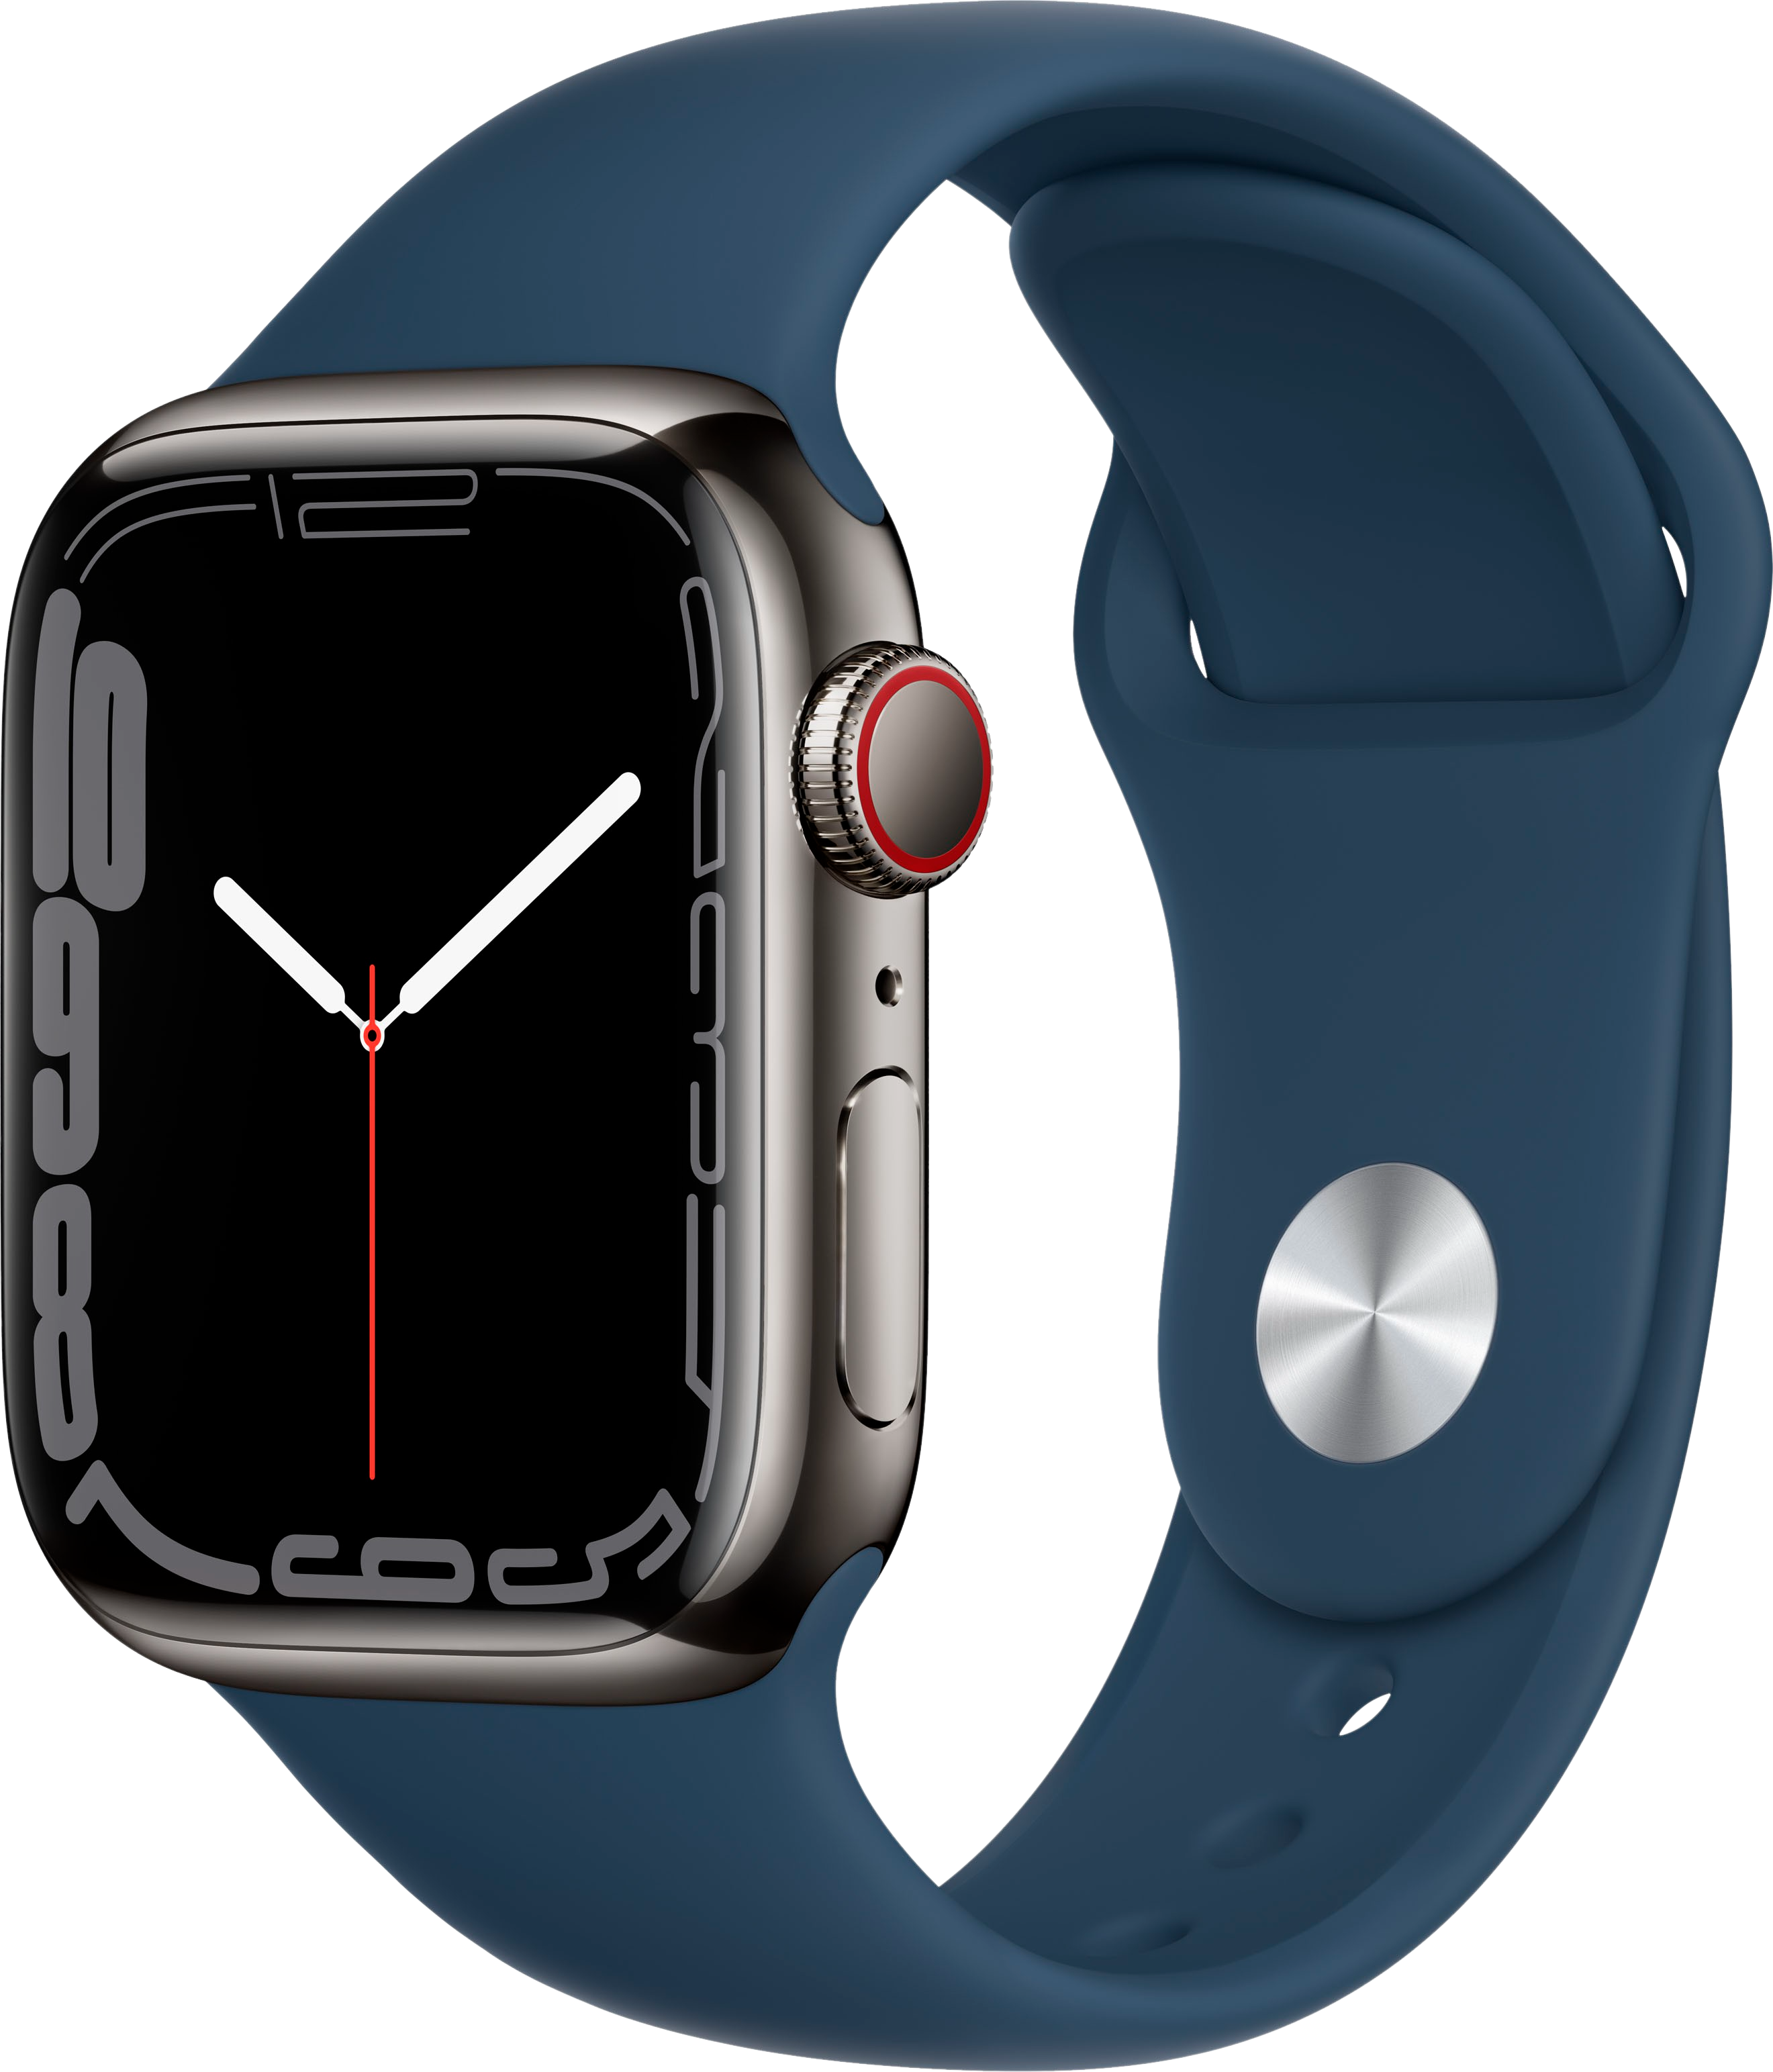 Graphite Apple Watch Series 7 GPS + Cellular, Stainless Steel Case and Sport Band, 41mm.1